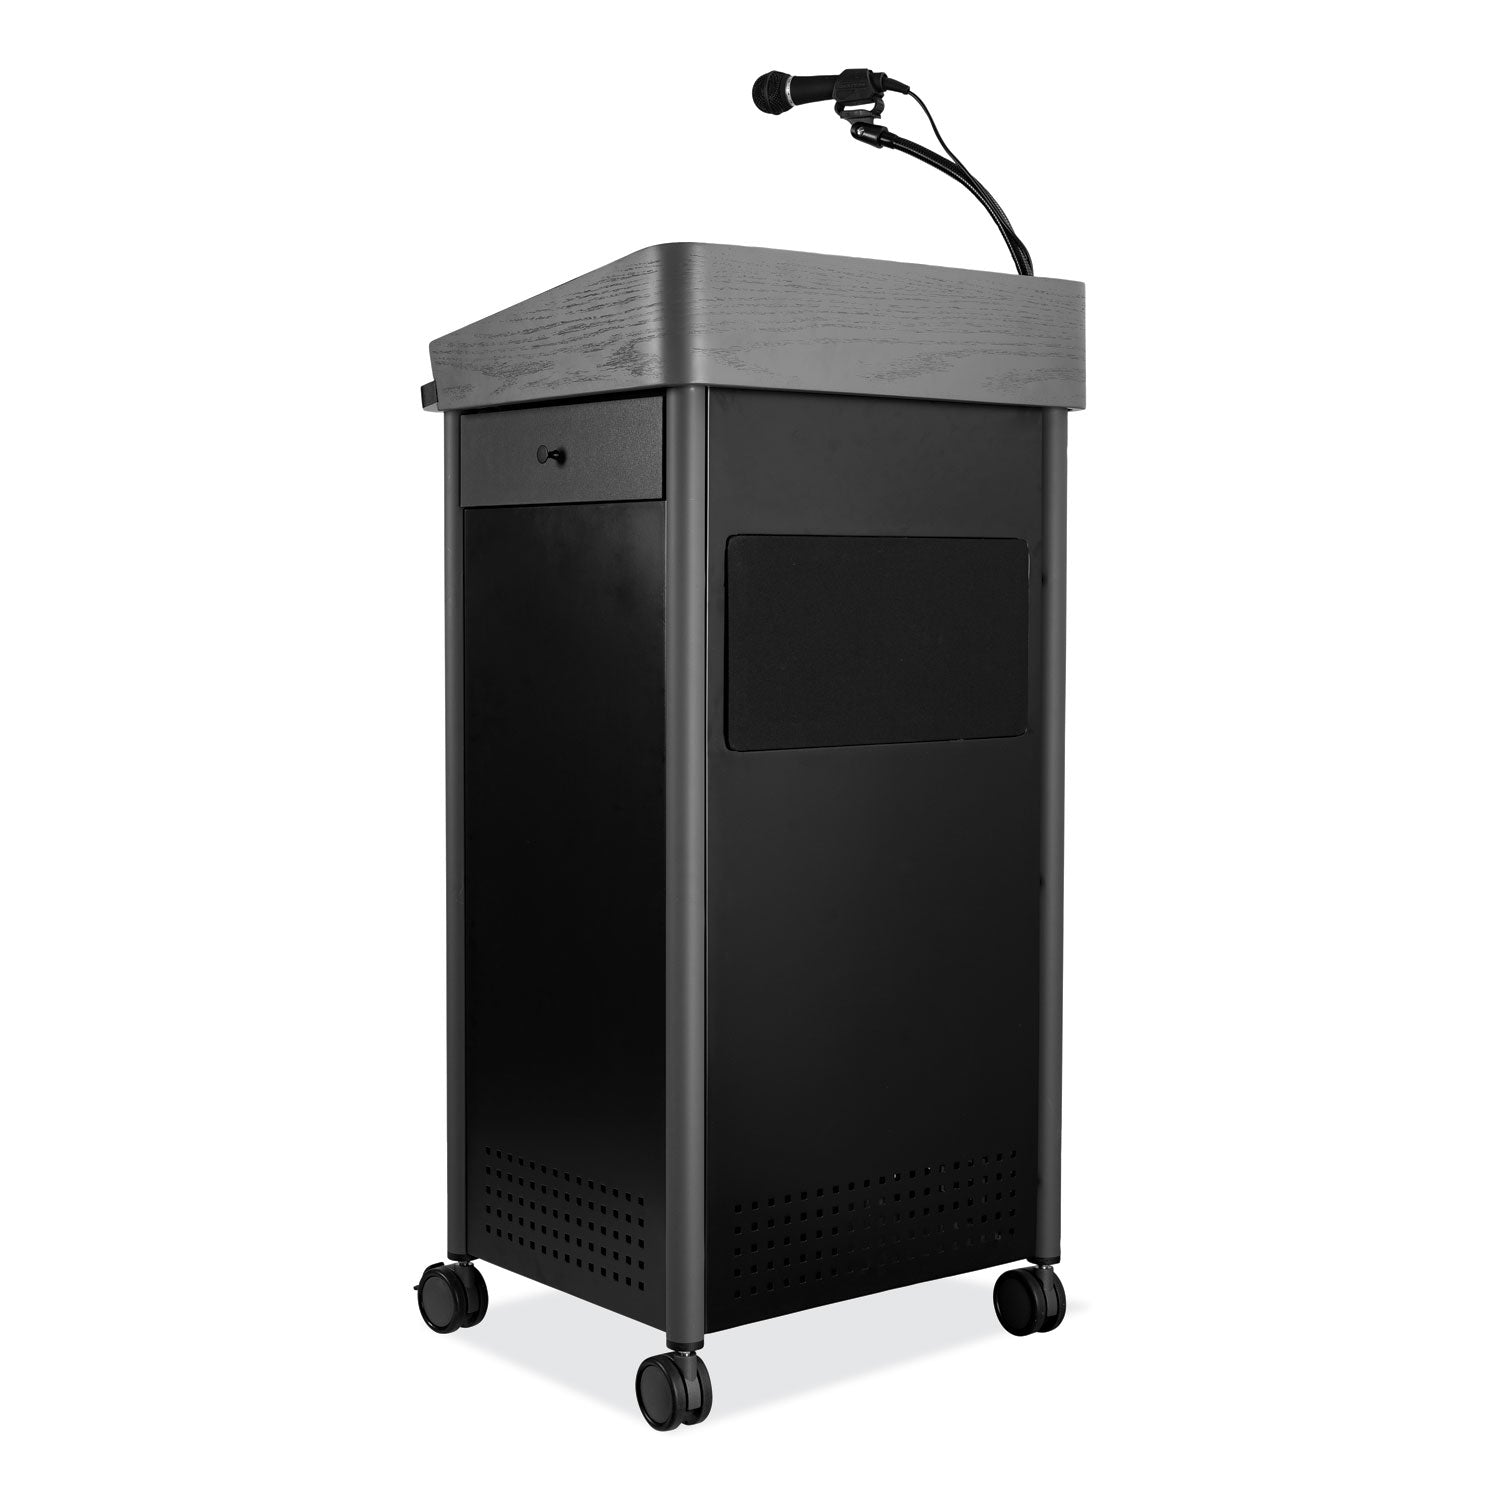 greystone-lectern-with-sound-235-x-1925-x-455-charcoal-gray-ships-in-1-3-business-days_npsgsls - 1